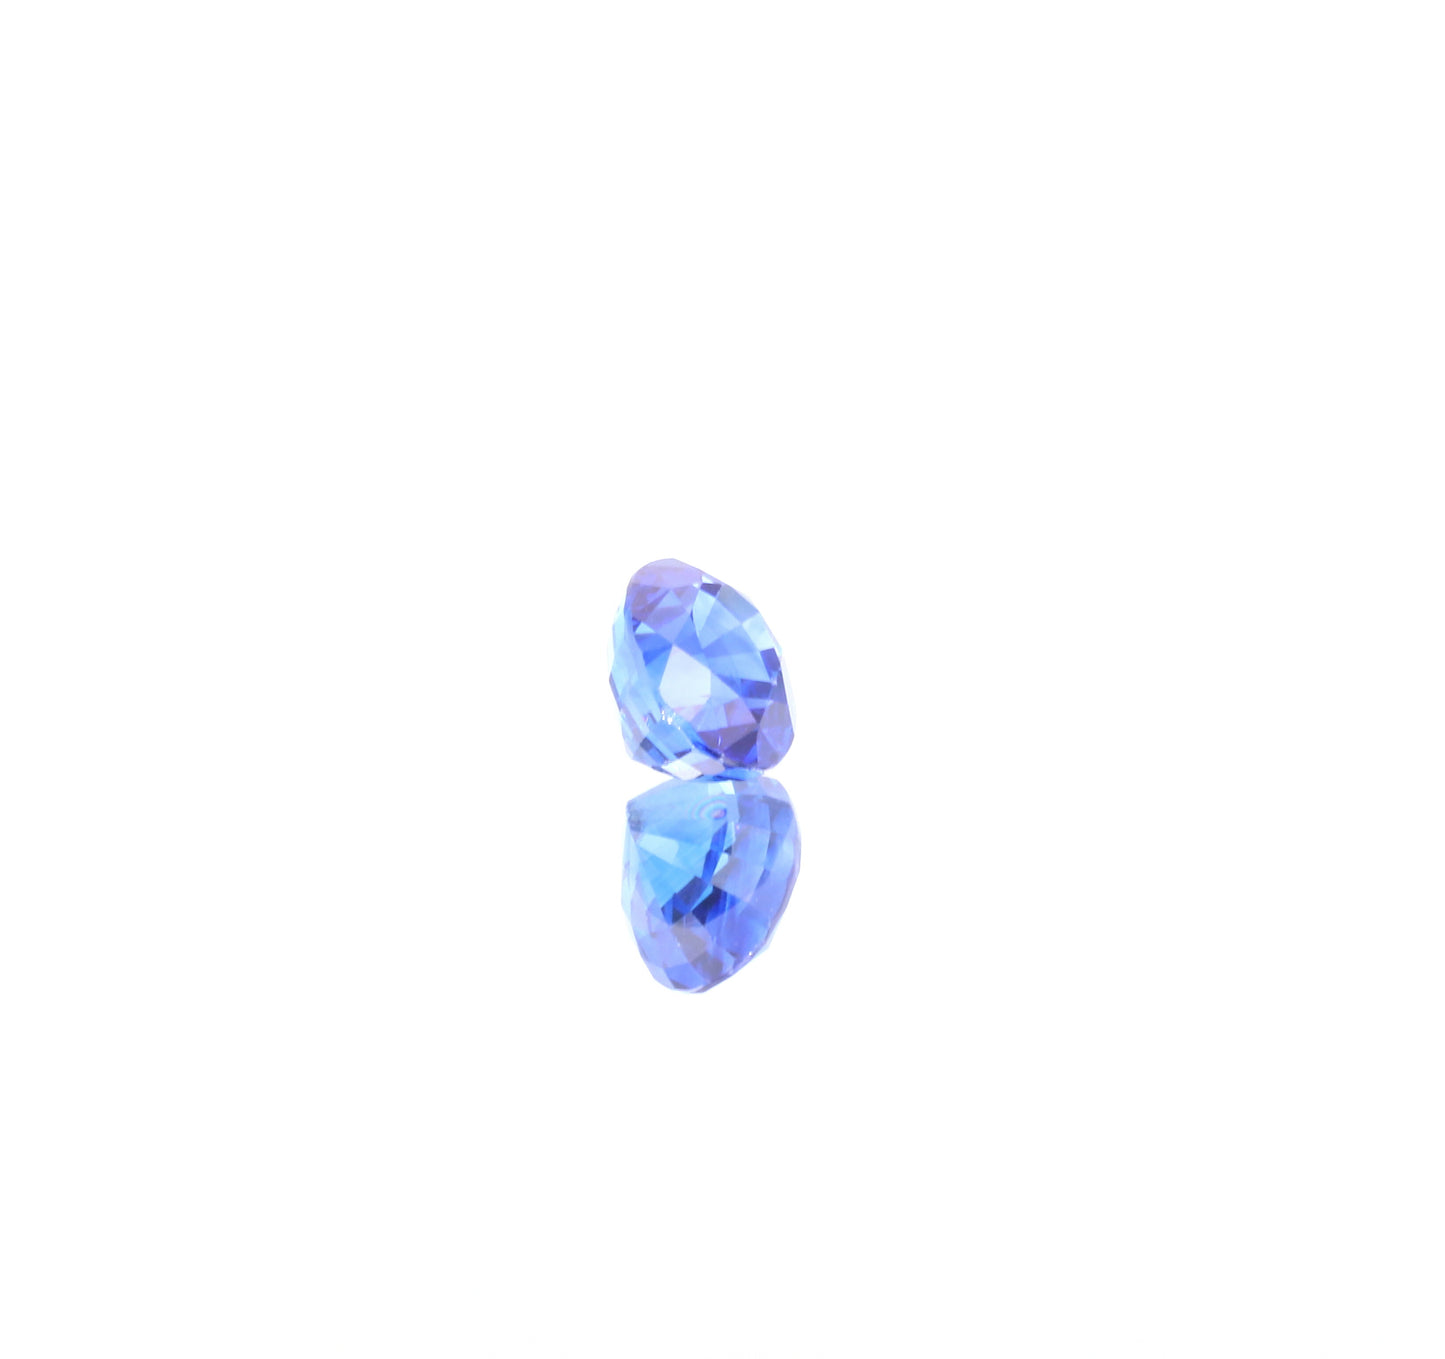 Load image into Gallery viewer, Natural Heated Blue Sapphire Oval Shape 3.08ct With GIA Report
